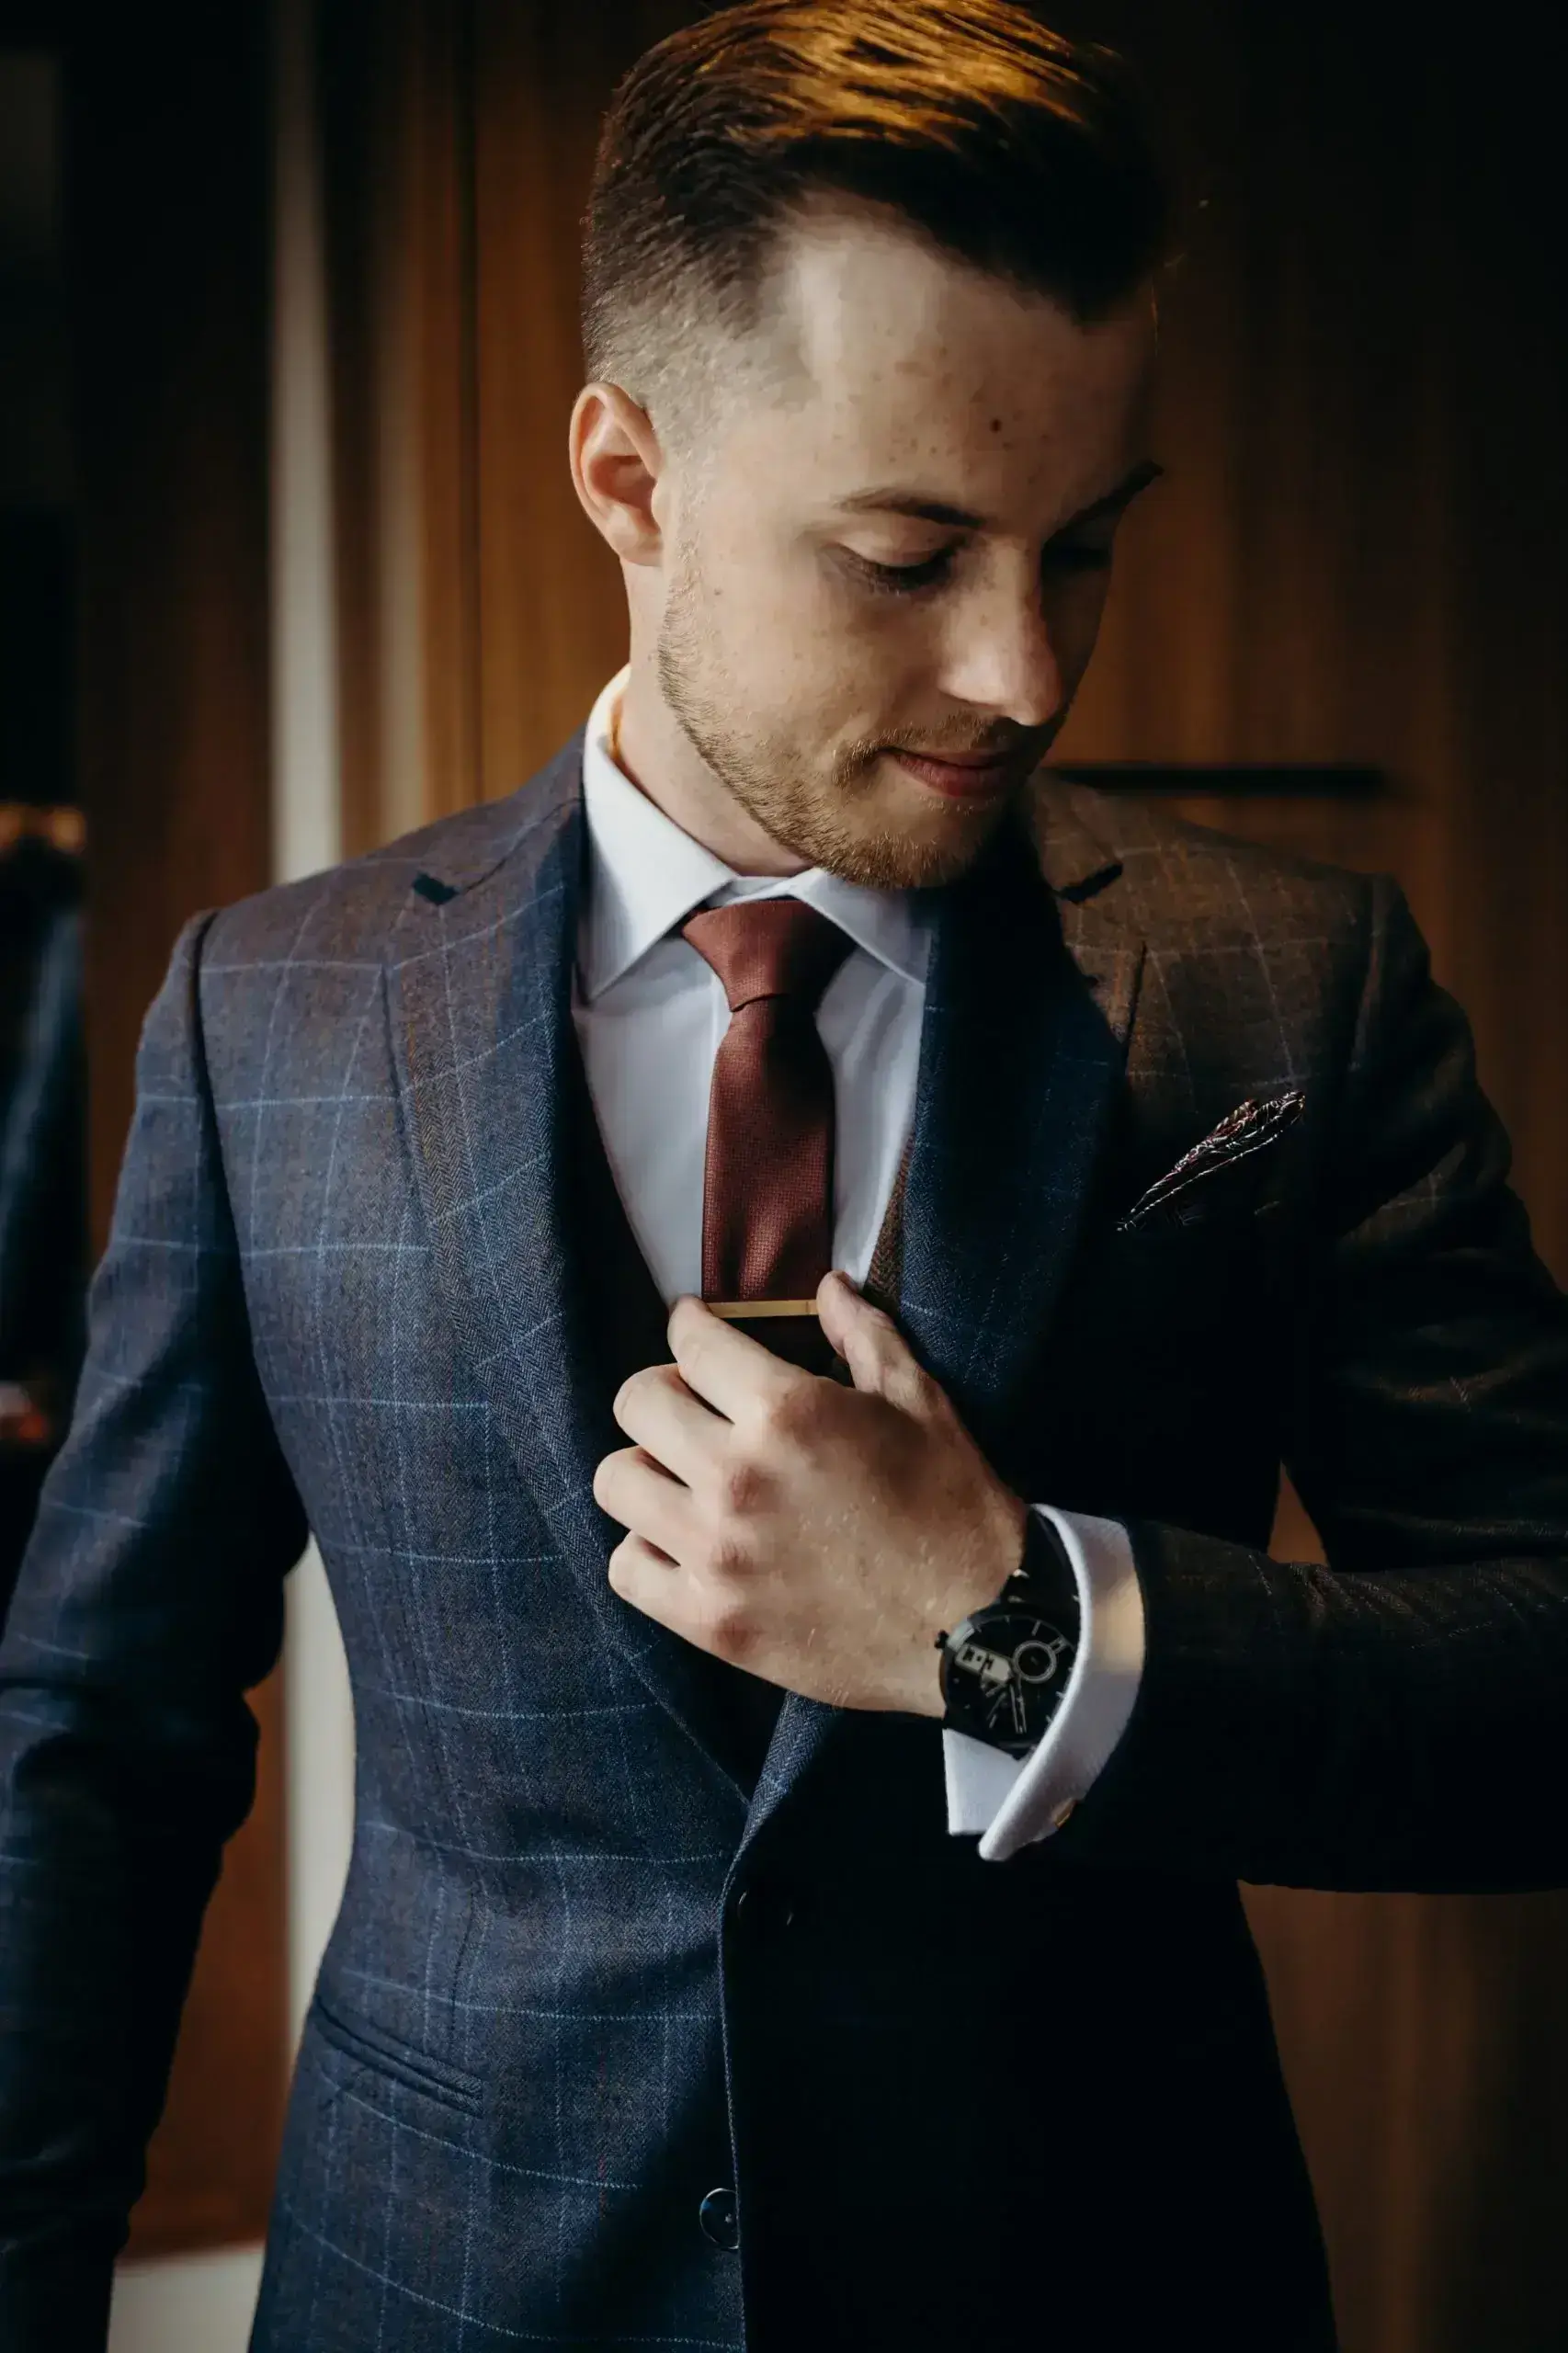 British vs. American vs. Italian: Which Men's Suit Would Suit You